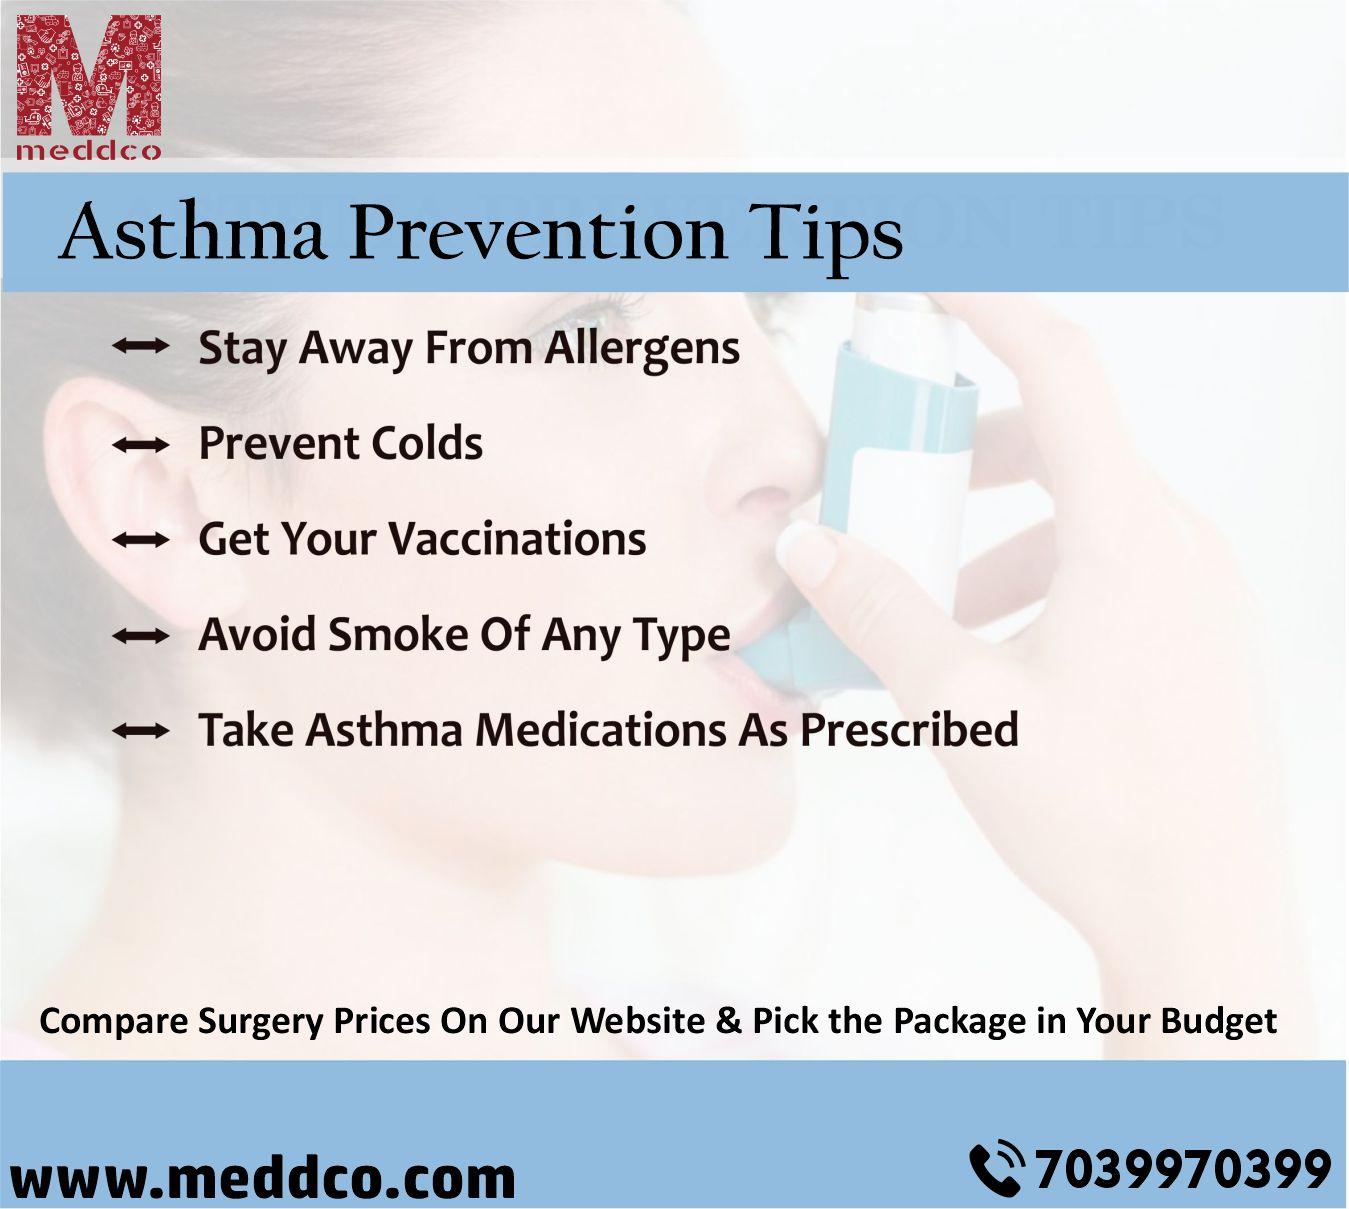 C:\Users\anmol\Downloads\Asthma Prevention Tips.jpg